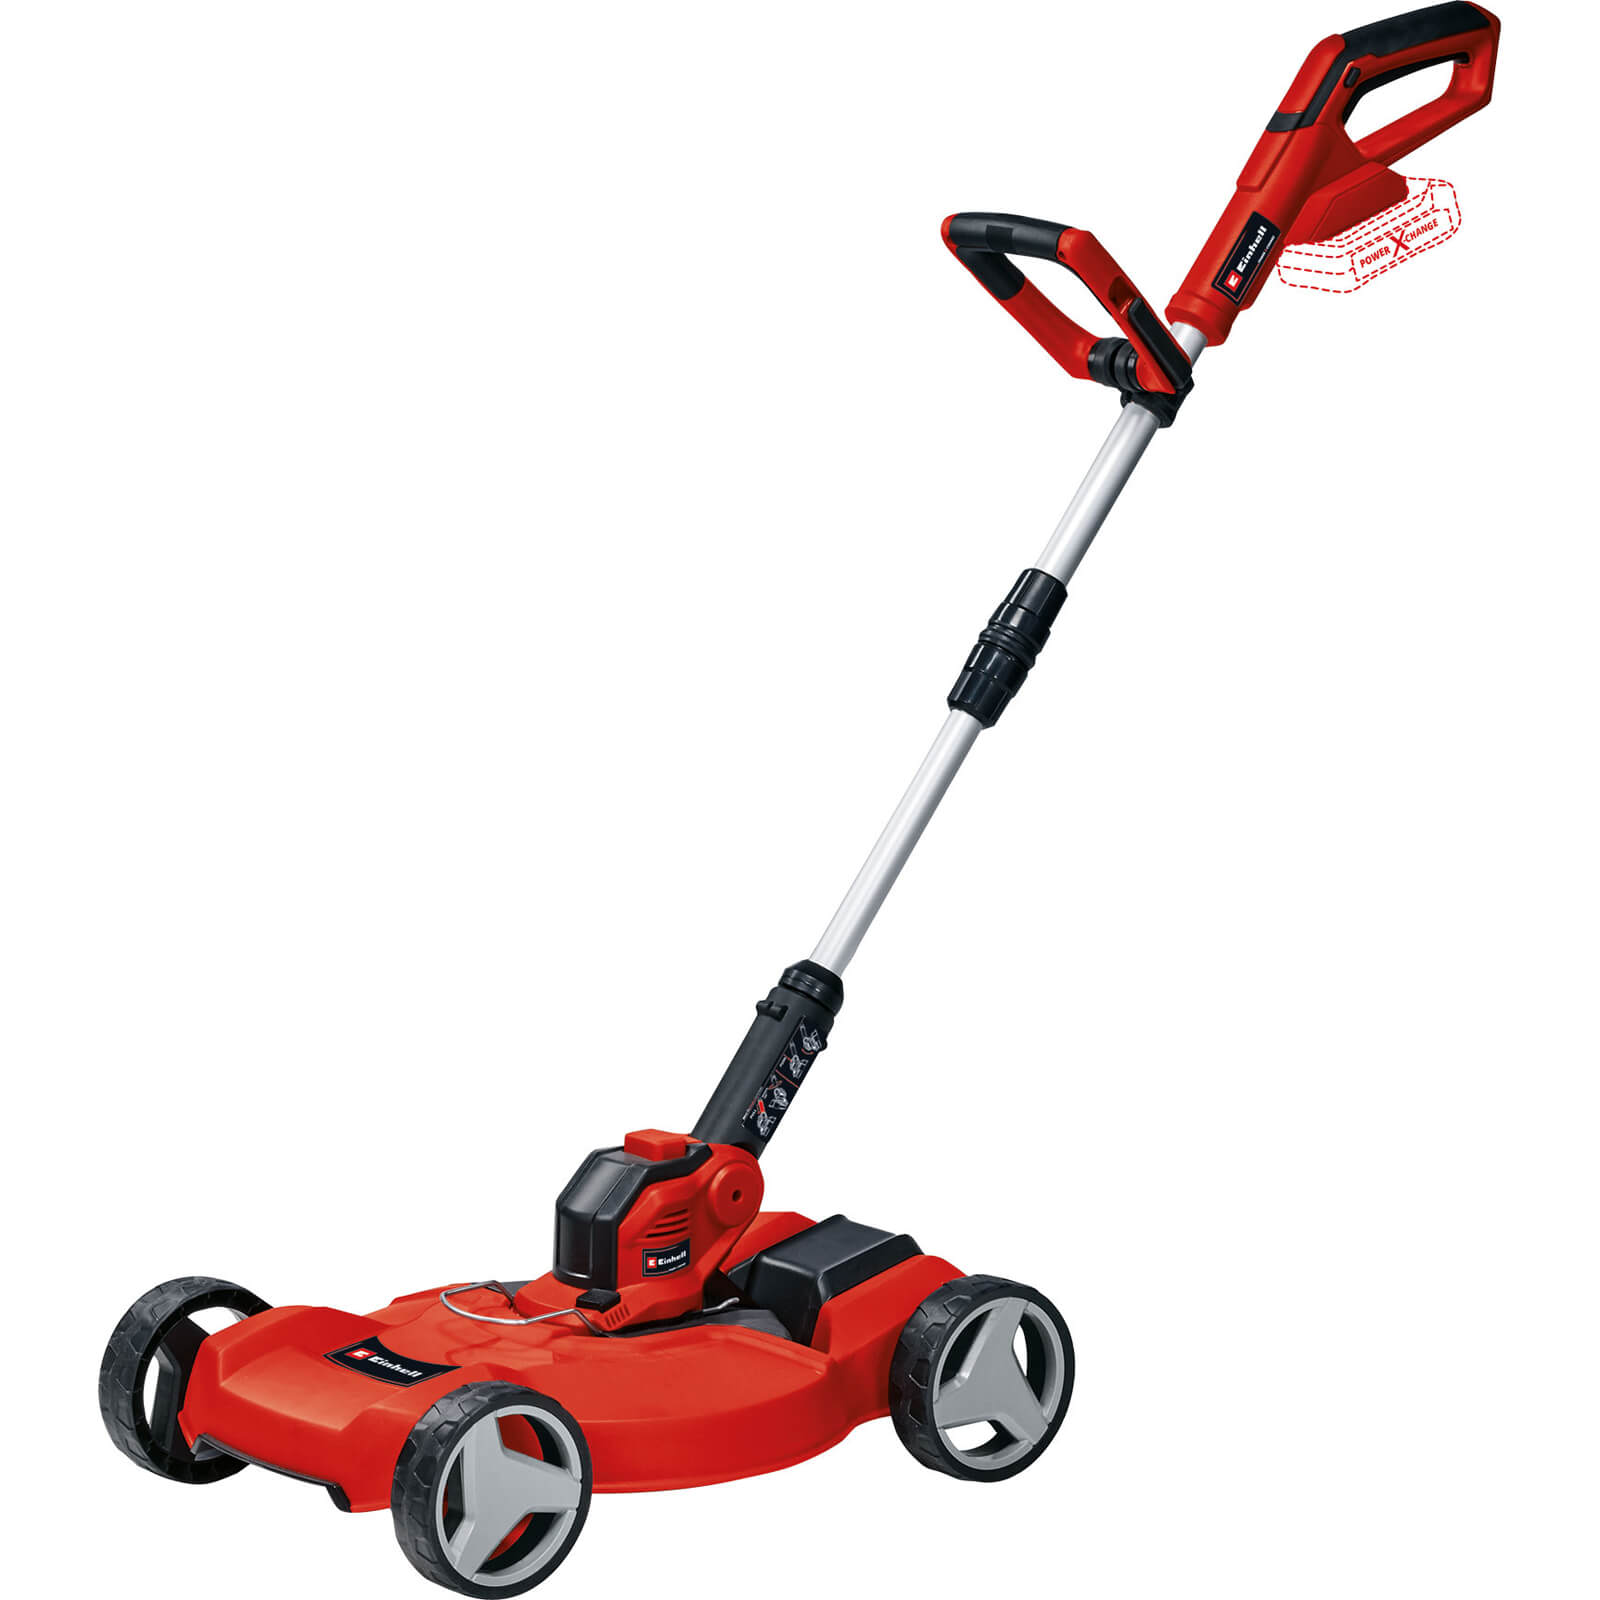 Image of Einhell GE-CT 18/28 Li TC 18v Cordless Grass Trimmer and Edger 280mm No Batteries No Charger